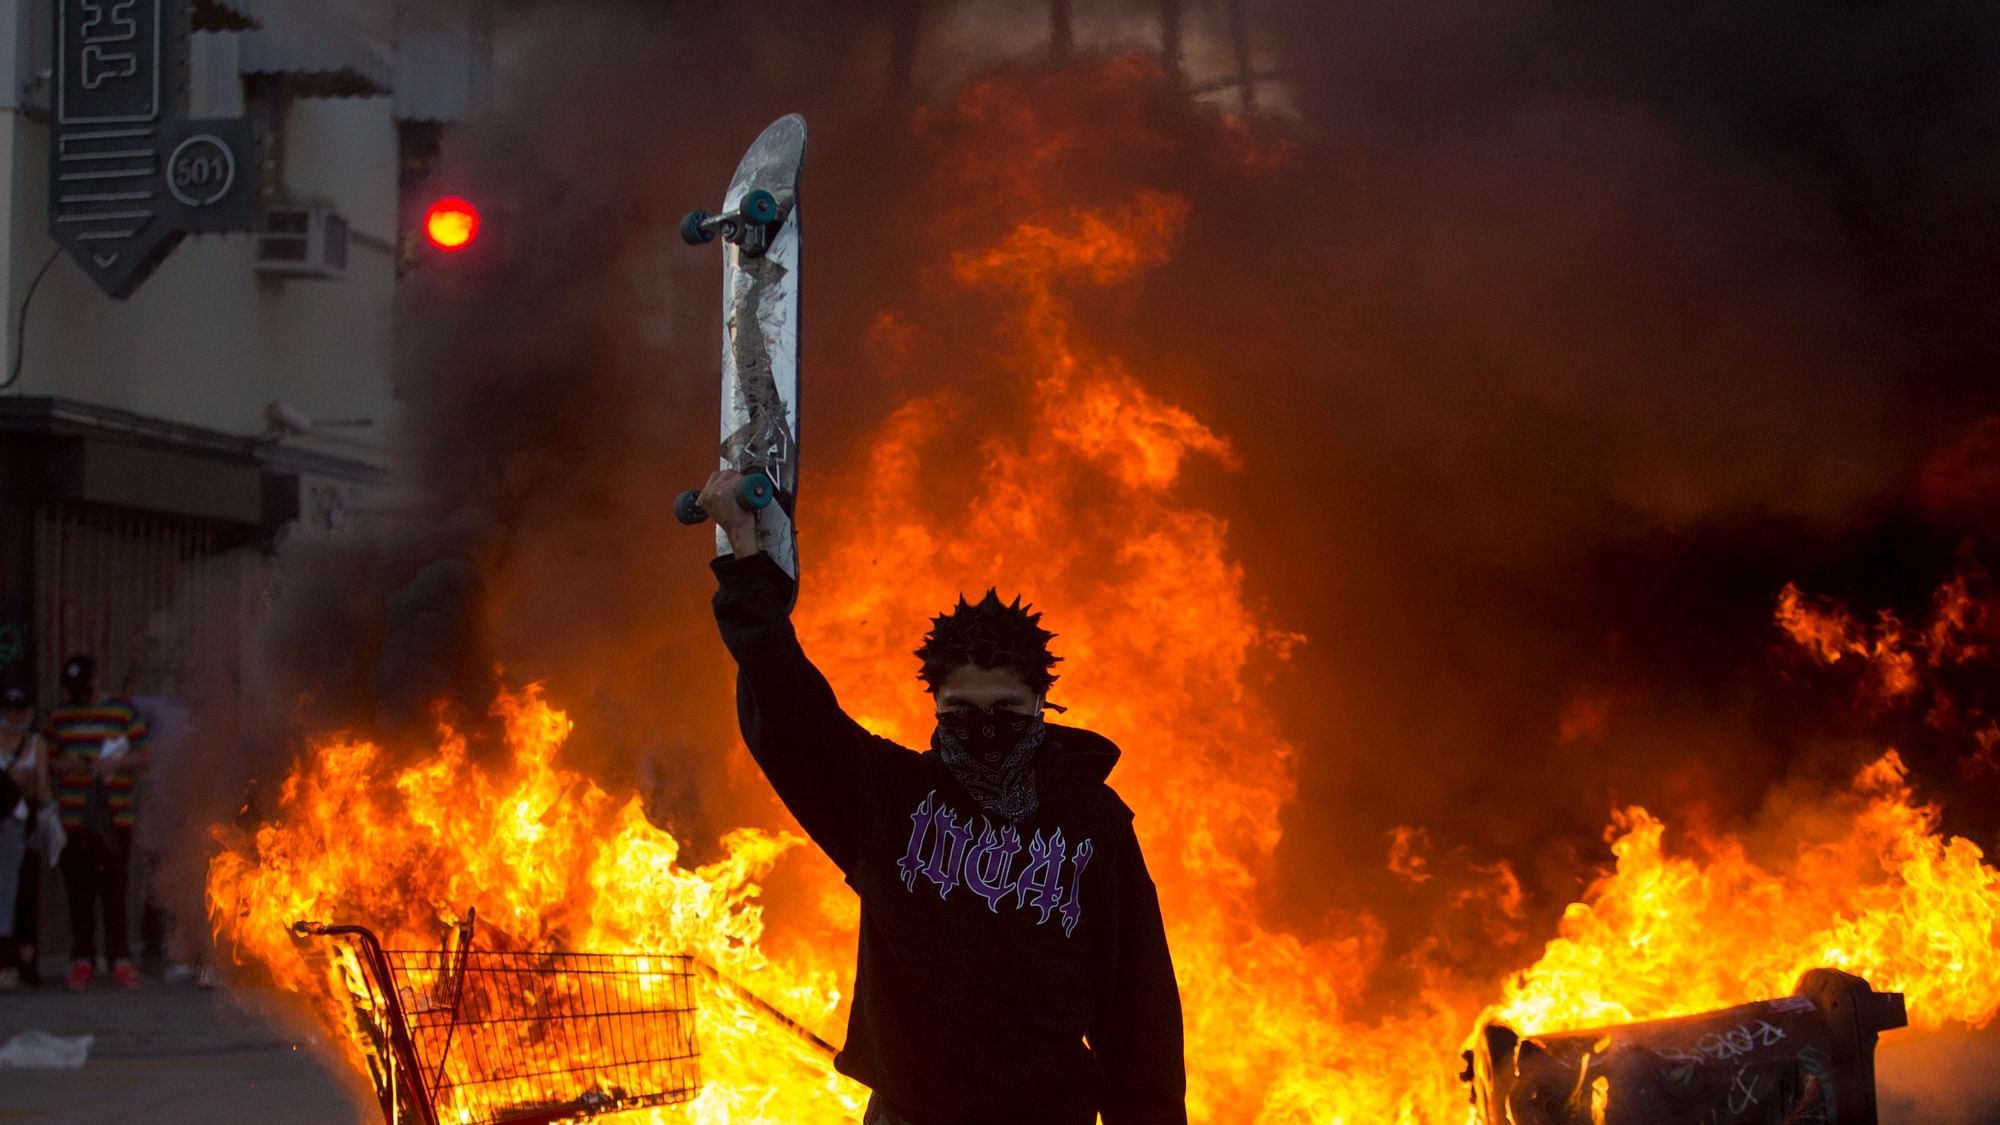 A protester holds a skateboard in front of a fire in Los Angeles, Saturday, 30 May 2020, during a protest over the death of George Floyd, a handcuffed black man who died in Minneapolis police custody on 25 May.